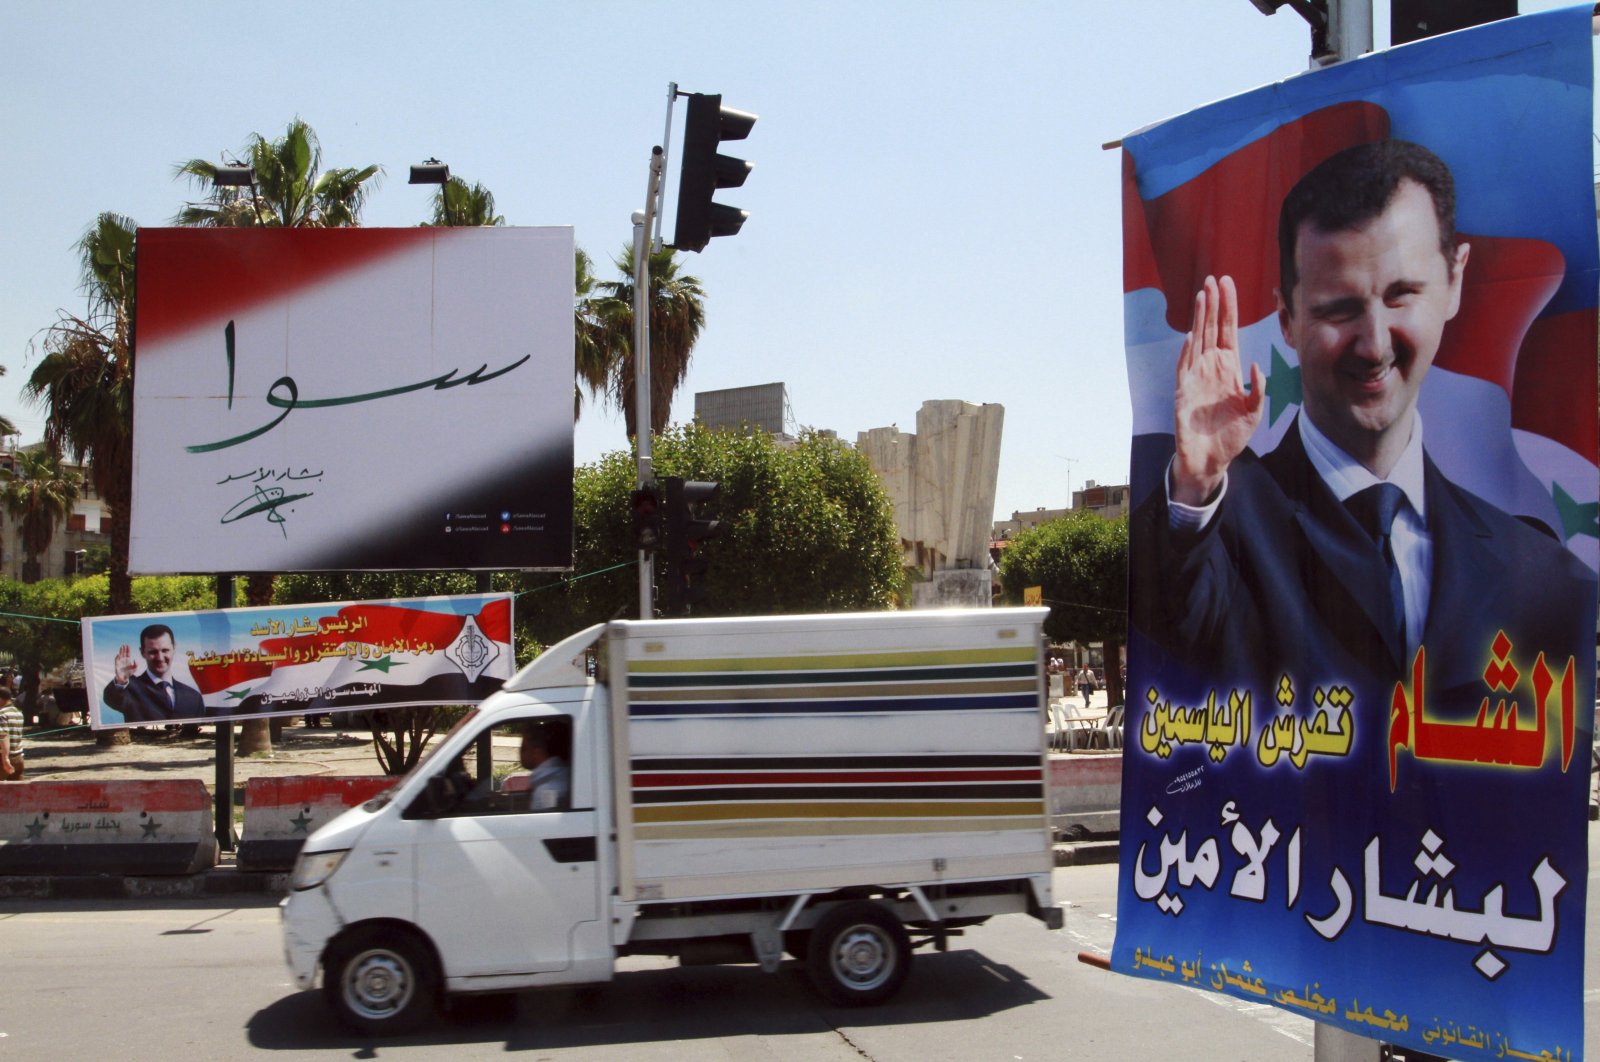 Campaign posters for the upcoming presidential election adorn a street in Damascus, Syria, May 12, 2014. (AP Photo)